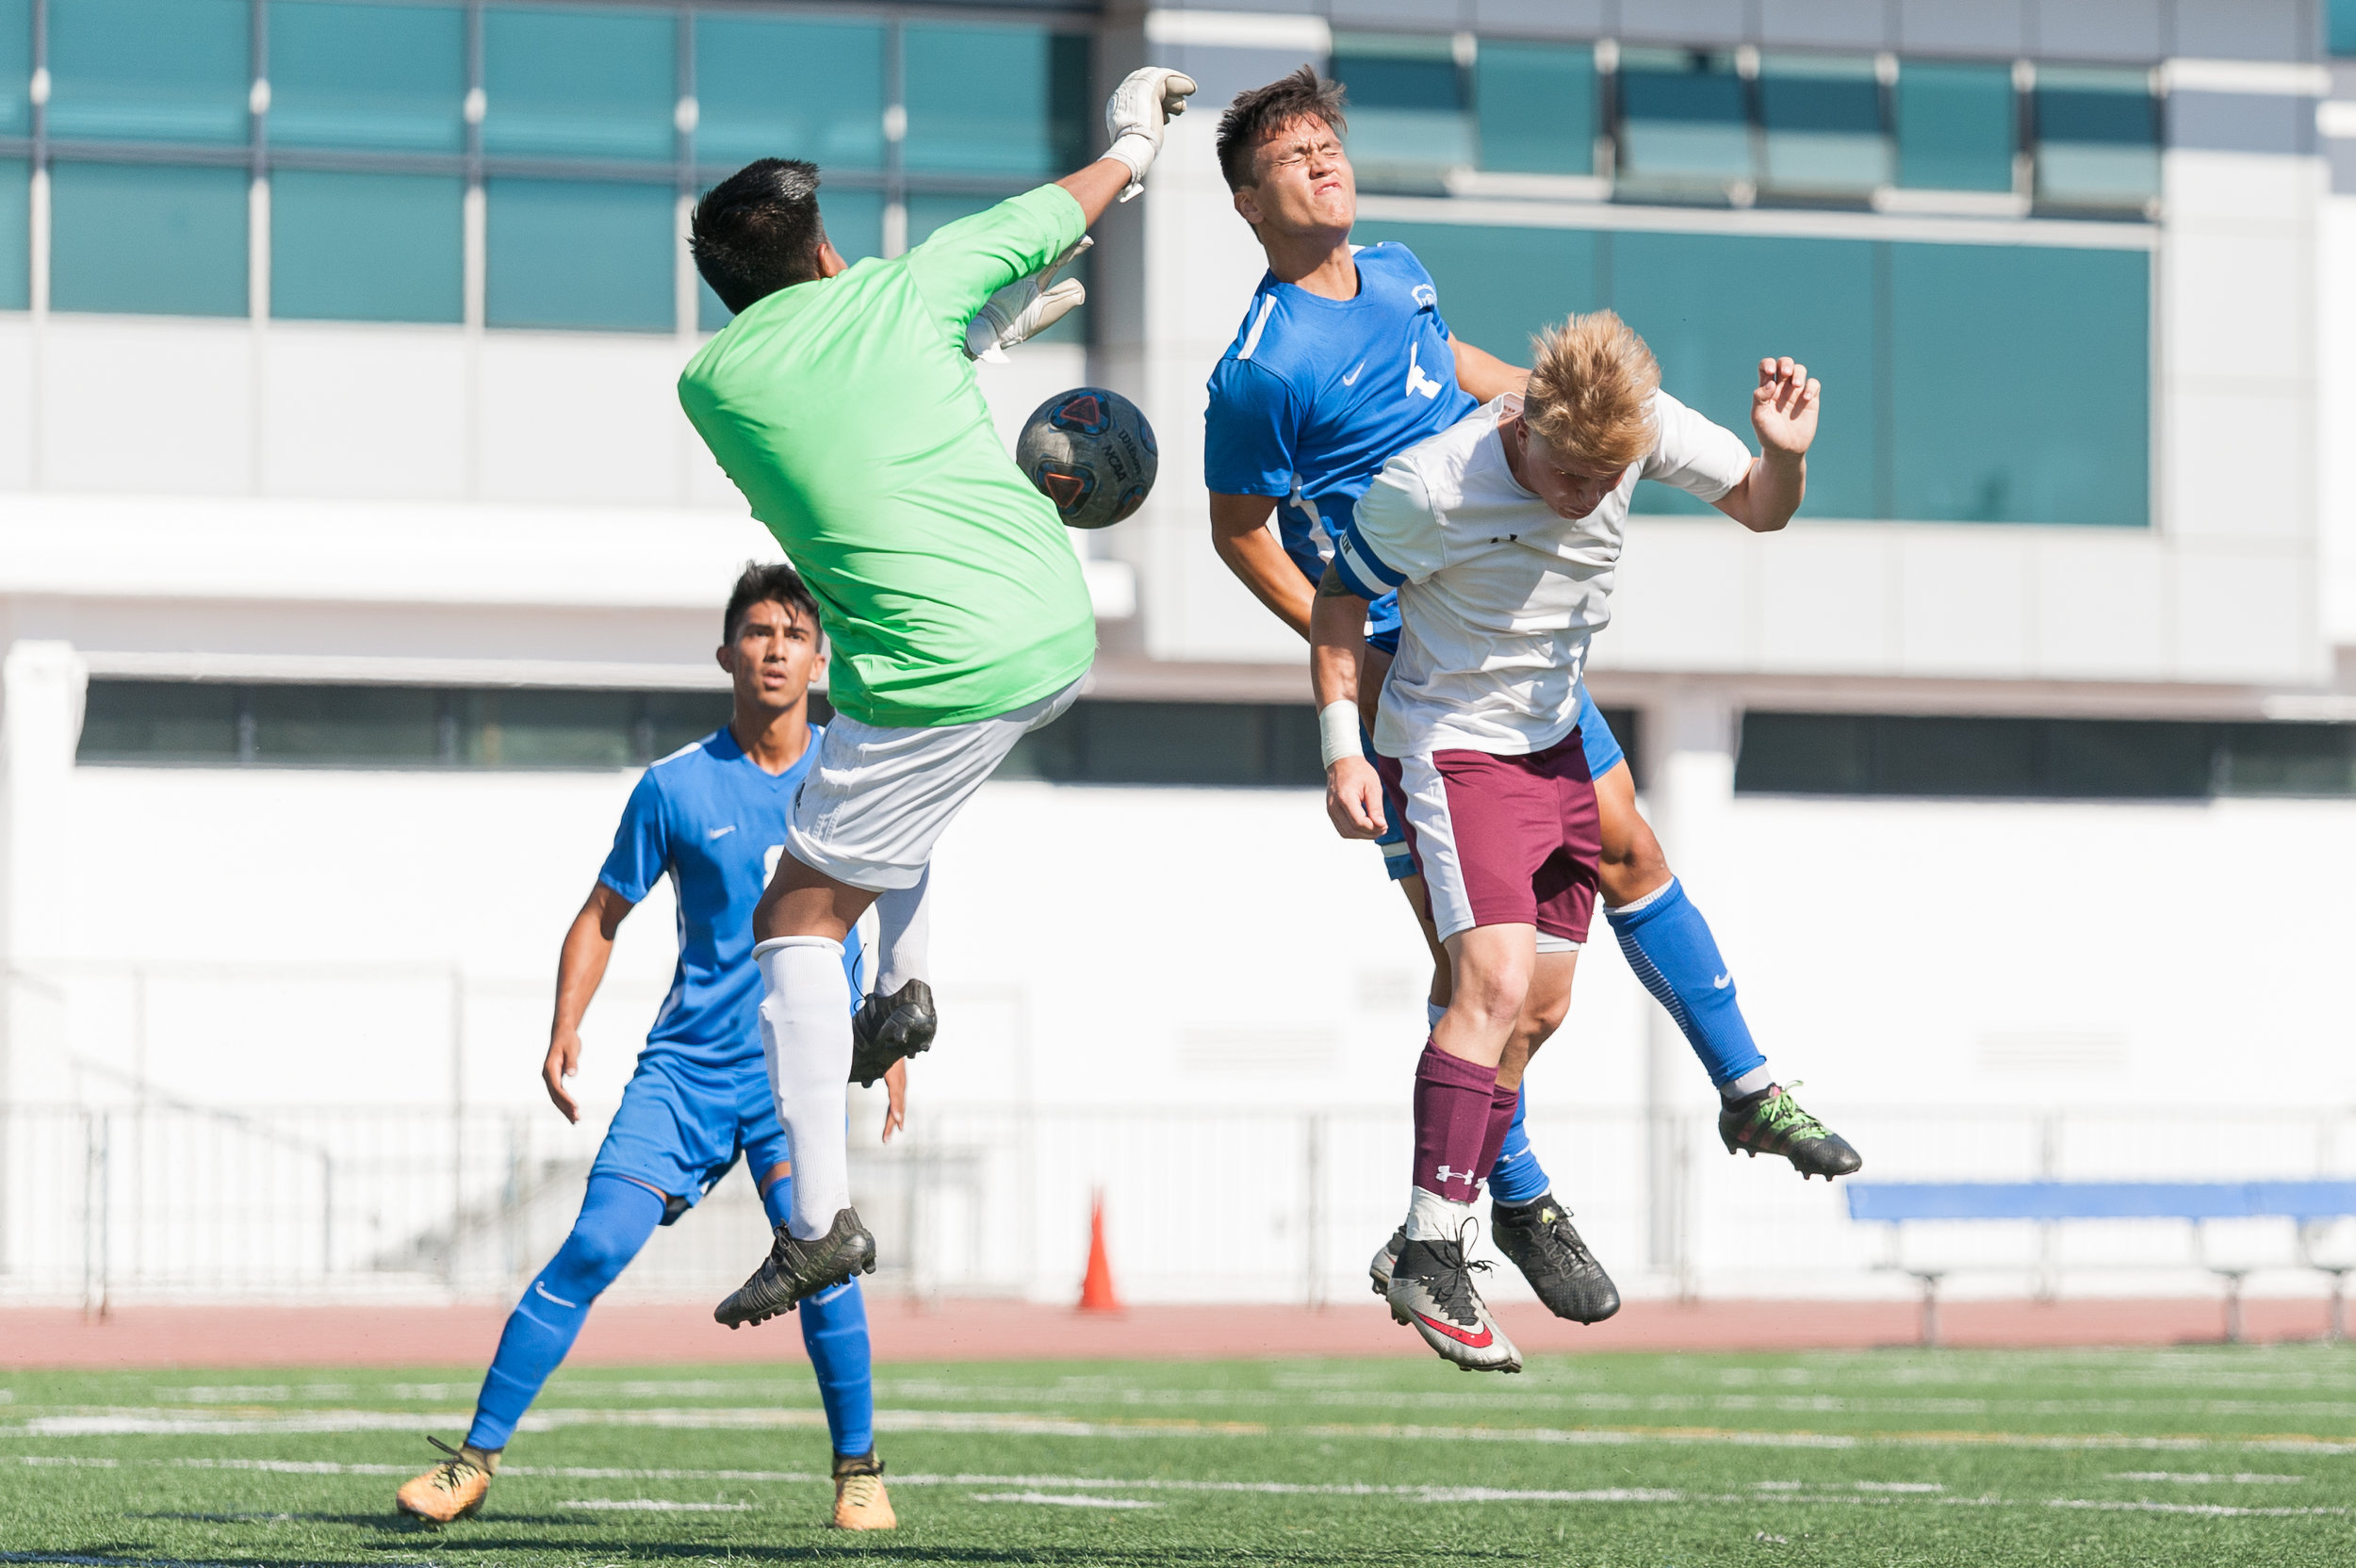  Defender Cesar Olivia (4,center) of Santa Monica College attempts a header to score a goal against Victor Valley College. The Santa Monica College Corsairs won the game 2-0 against the Victor Valley Rams. The match was held at the Corsair Stadium at